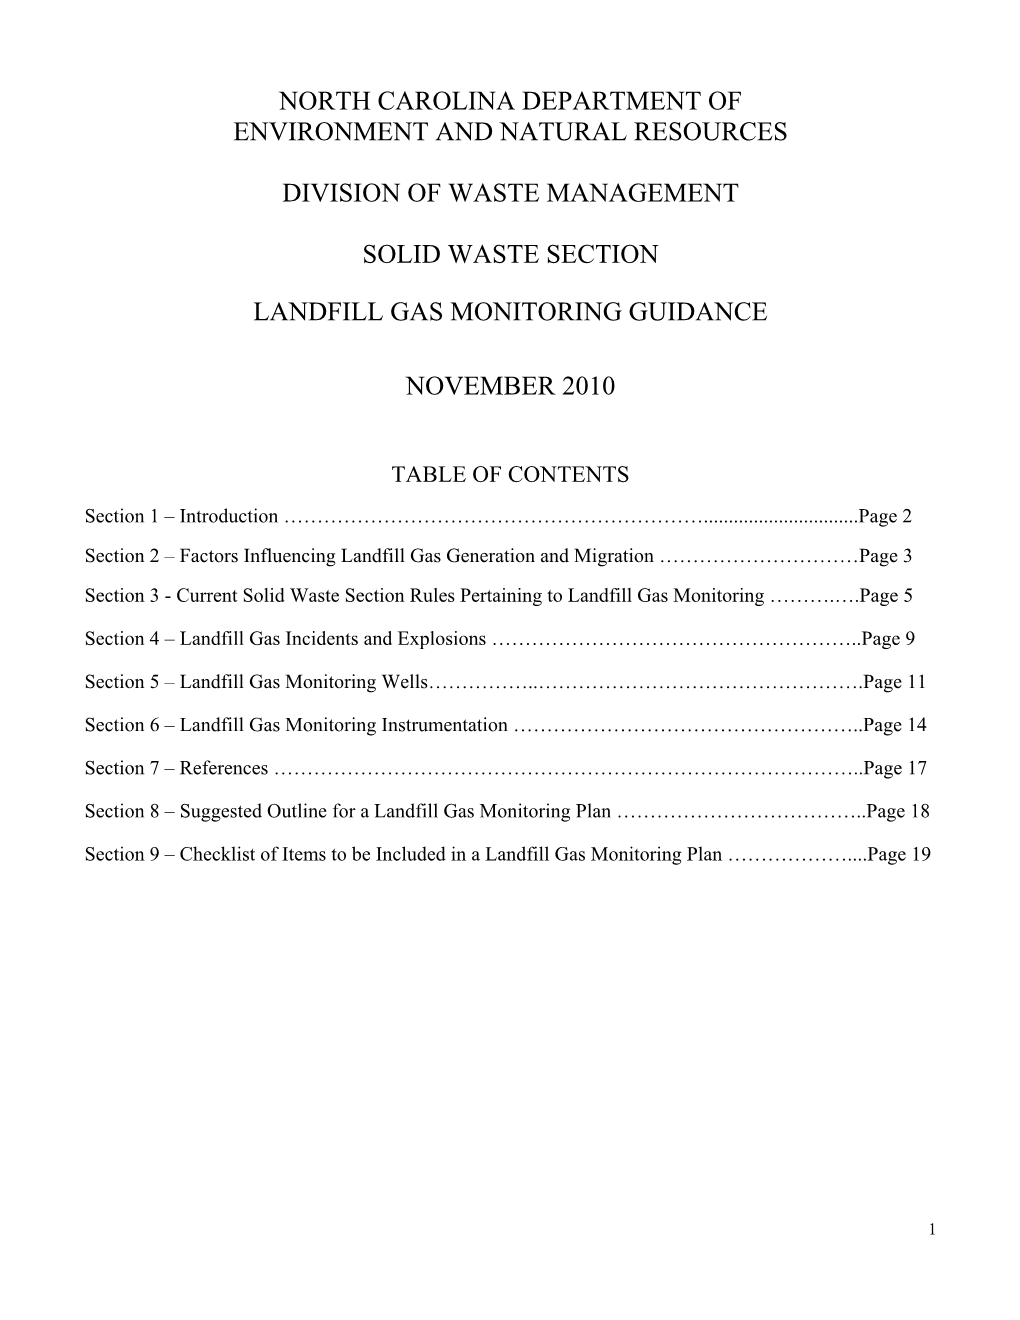 Landfill Gas Monitoring Guidance Document